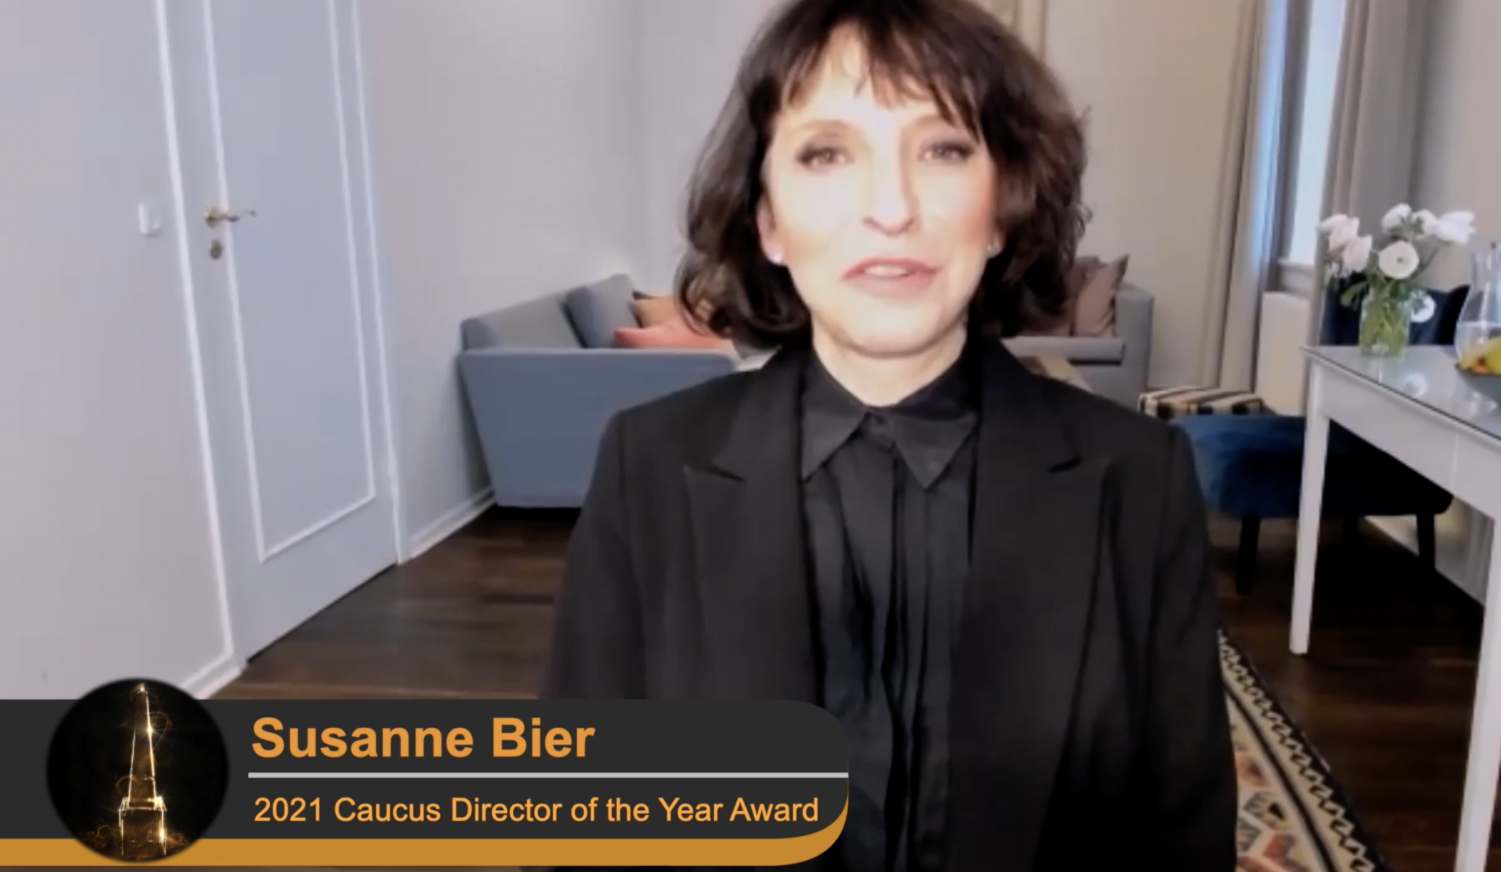 Susanne Bier accepts the Director of the Year Award on March 4, 2021 over Zoom during the 38th Annual Caucus Award show.